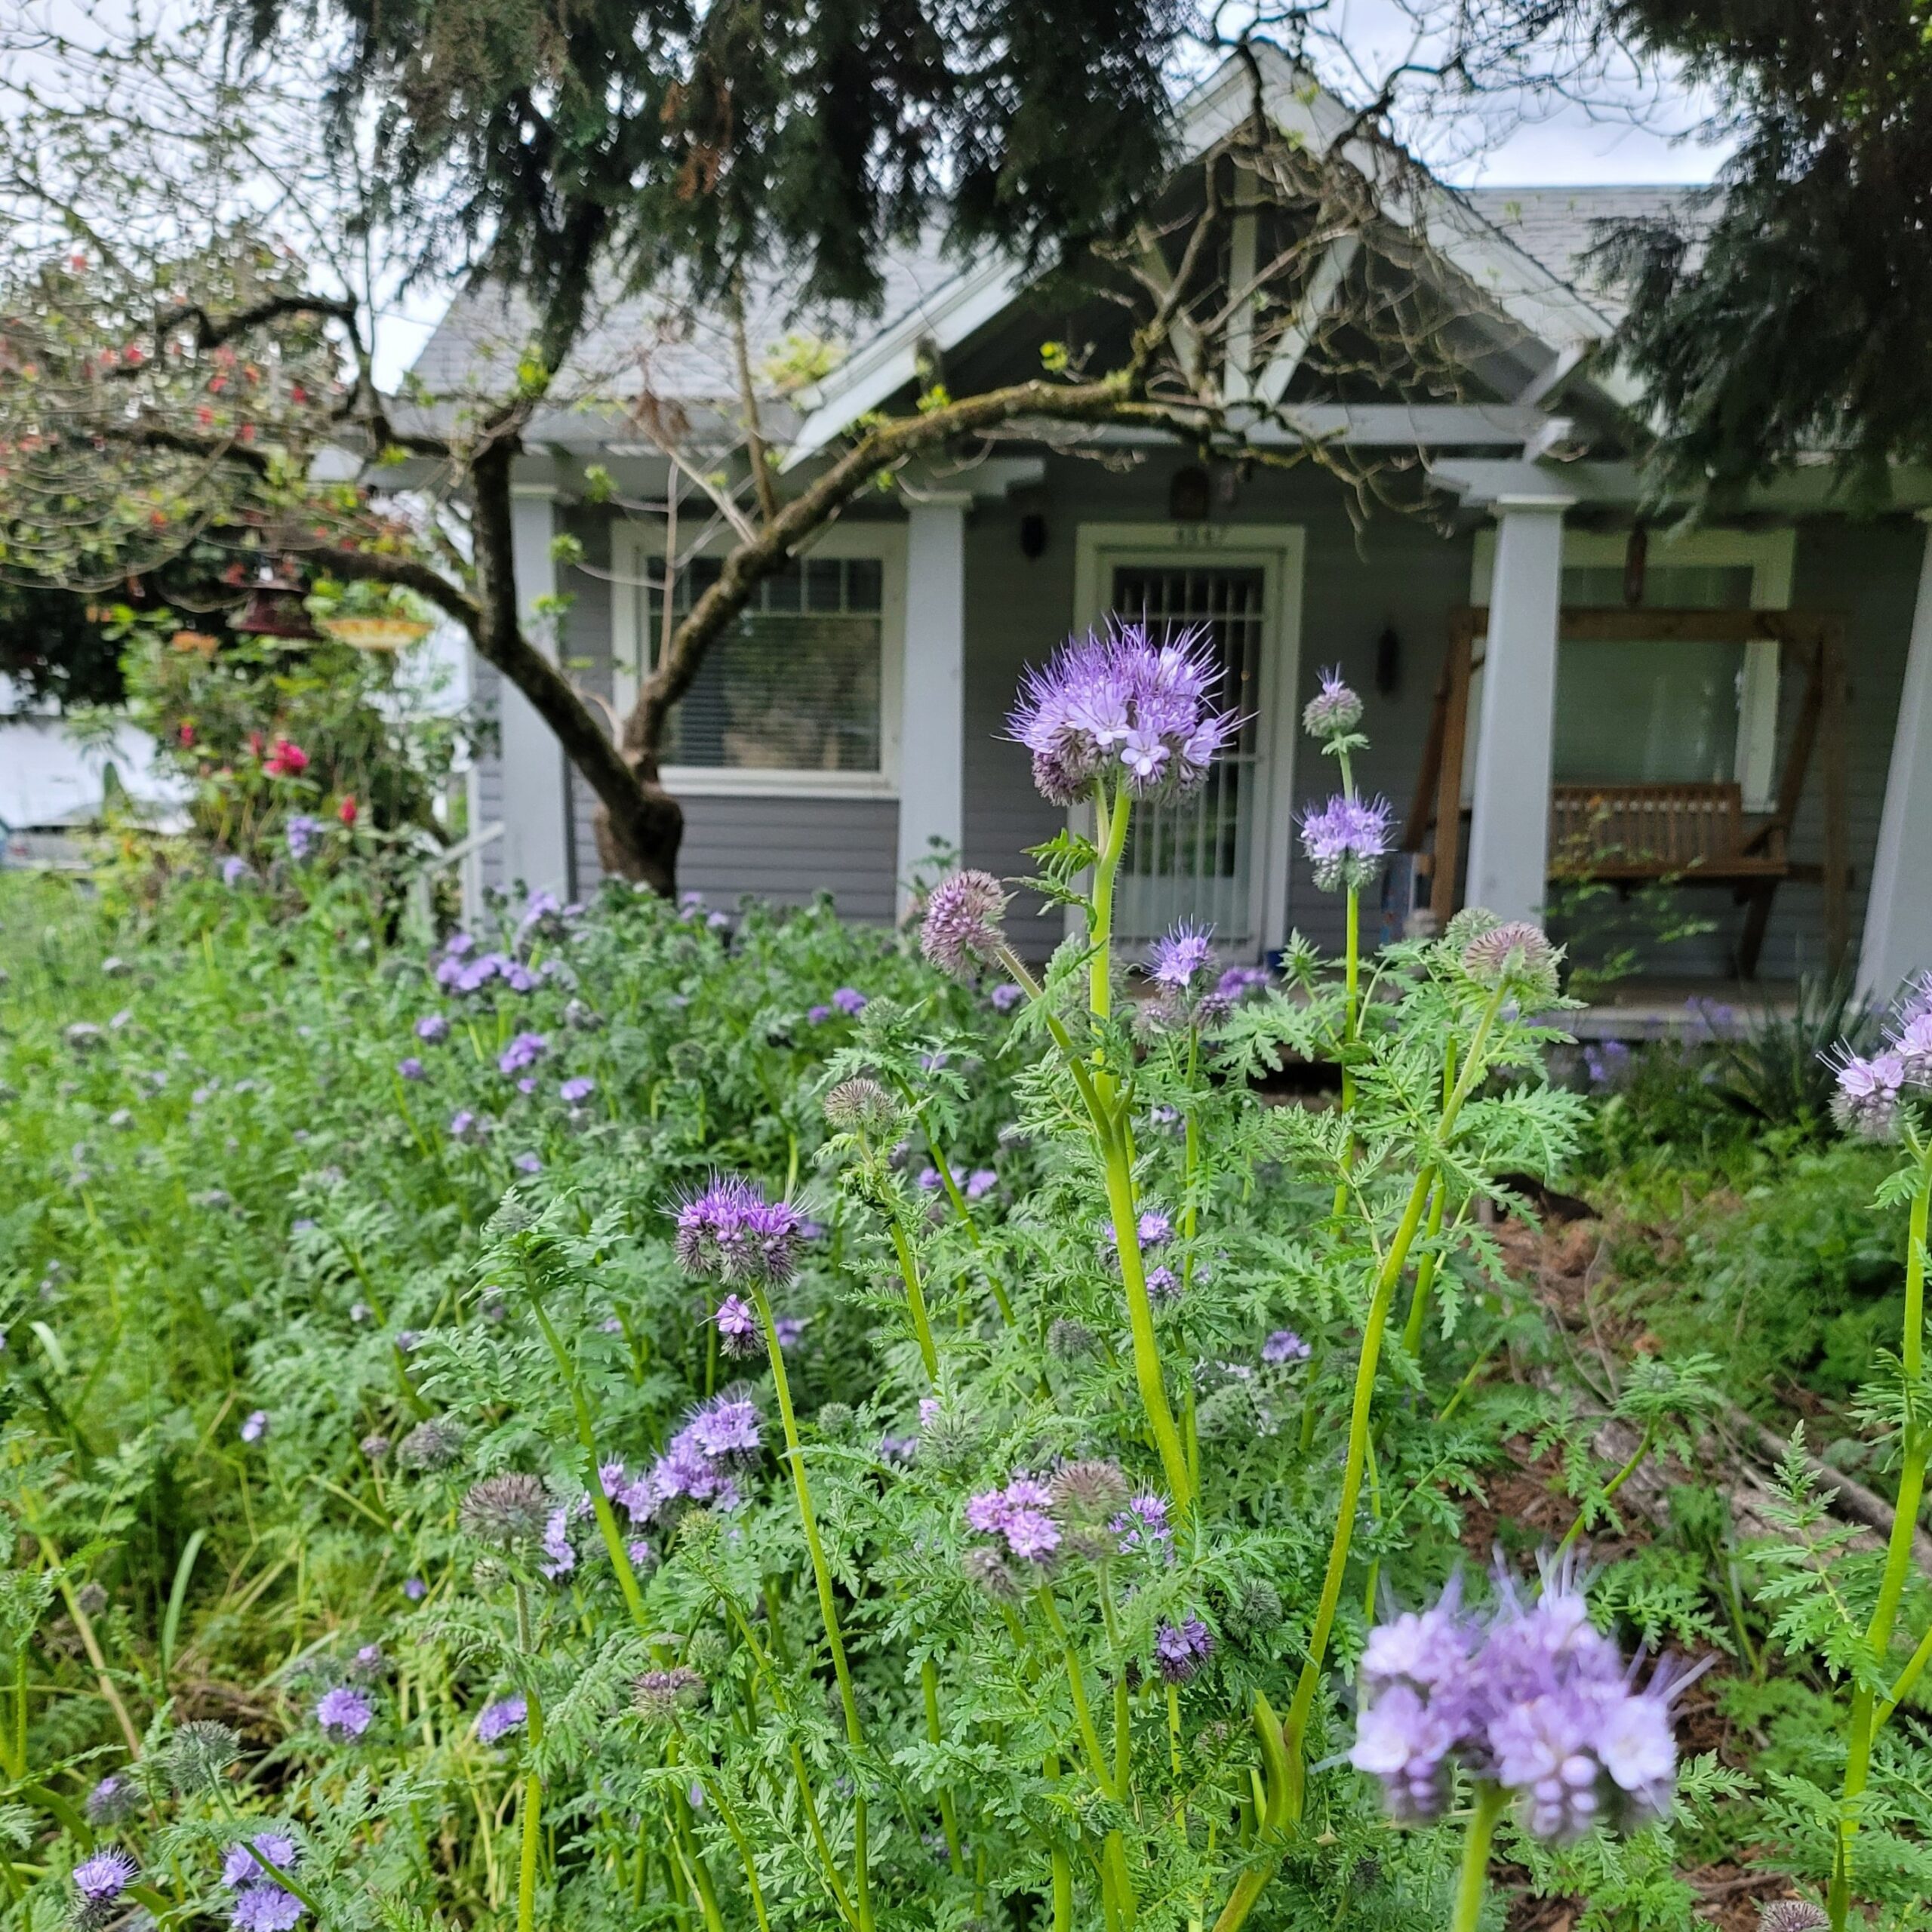 Purple flowers in foreground, in the background a tree and a blue and white house